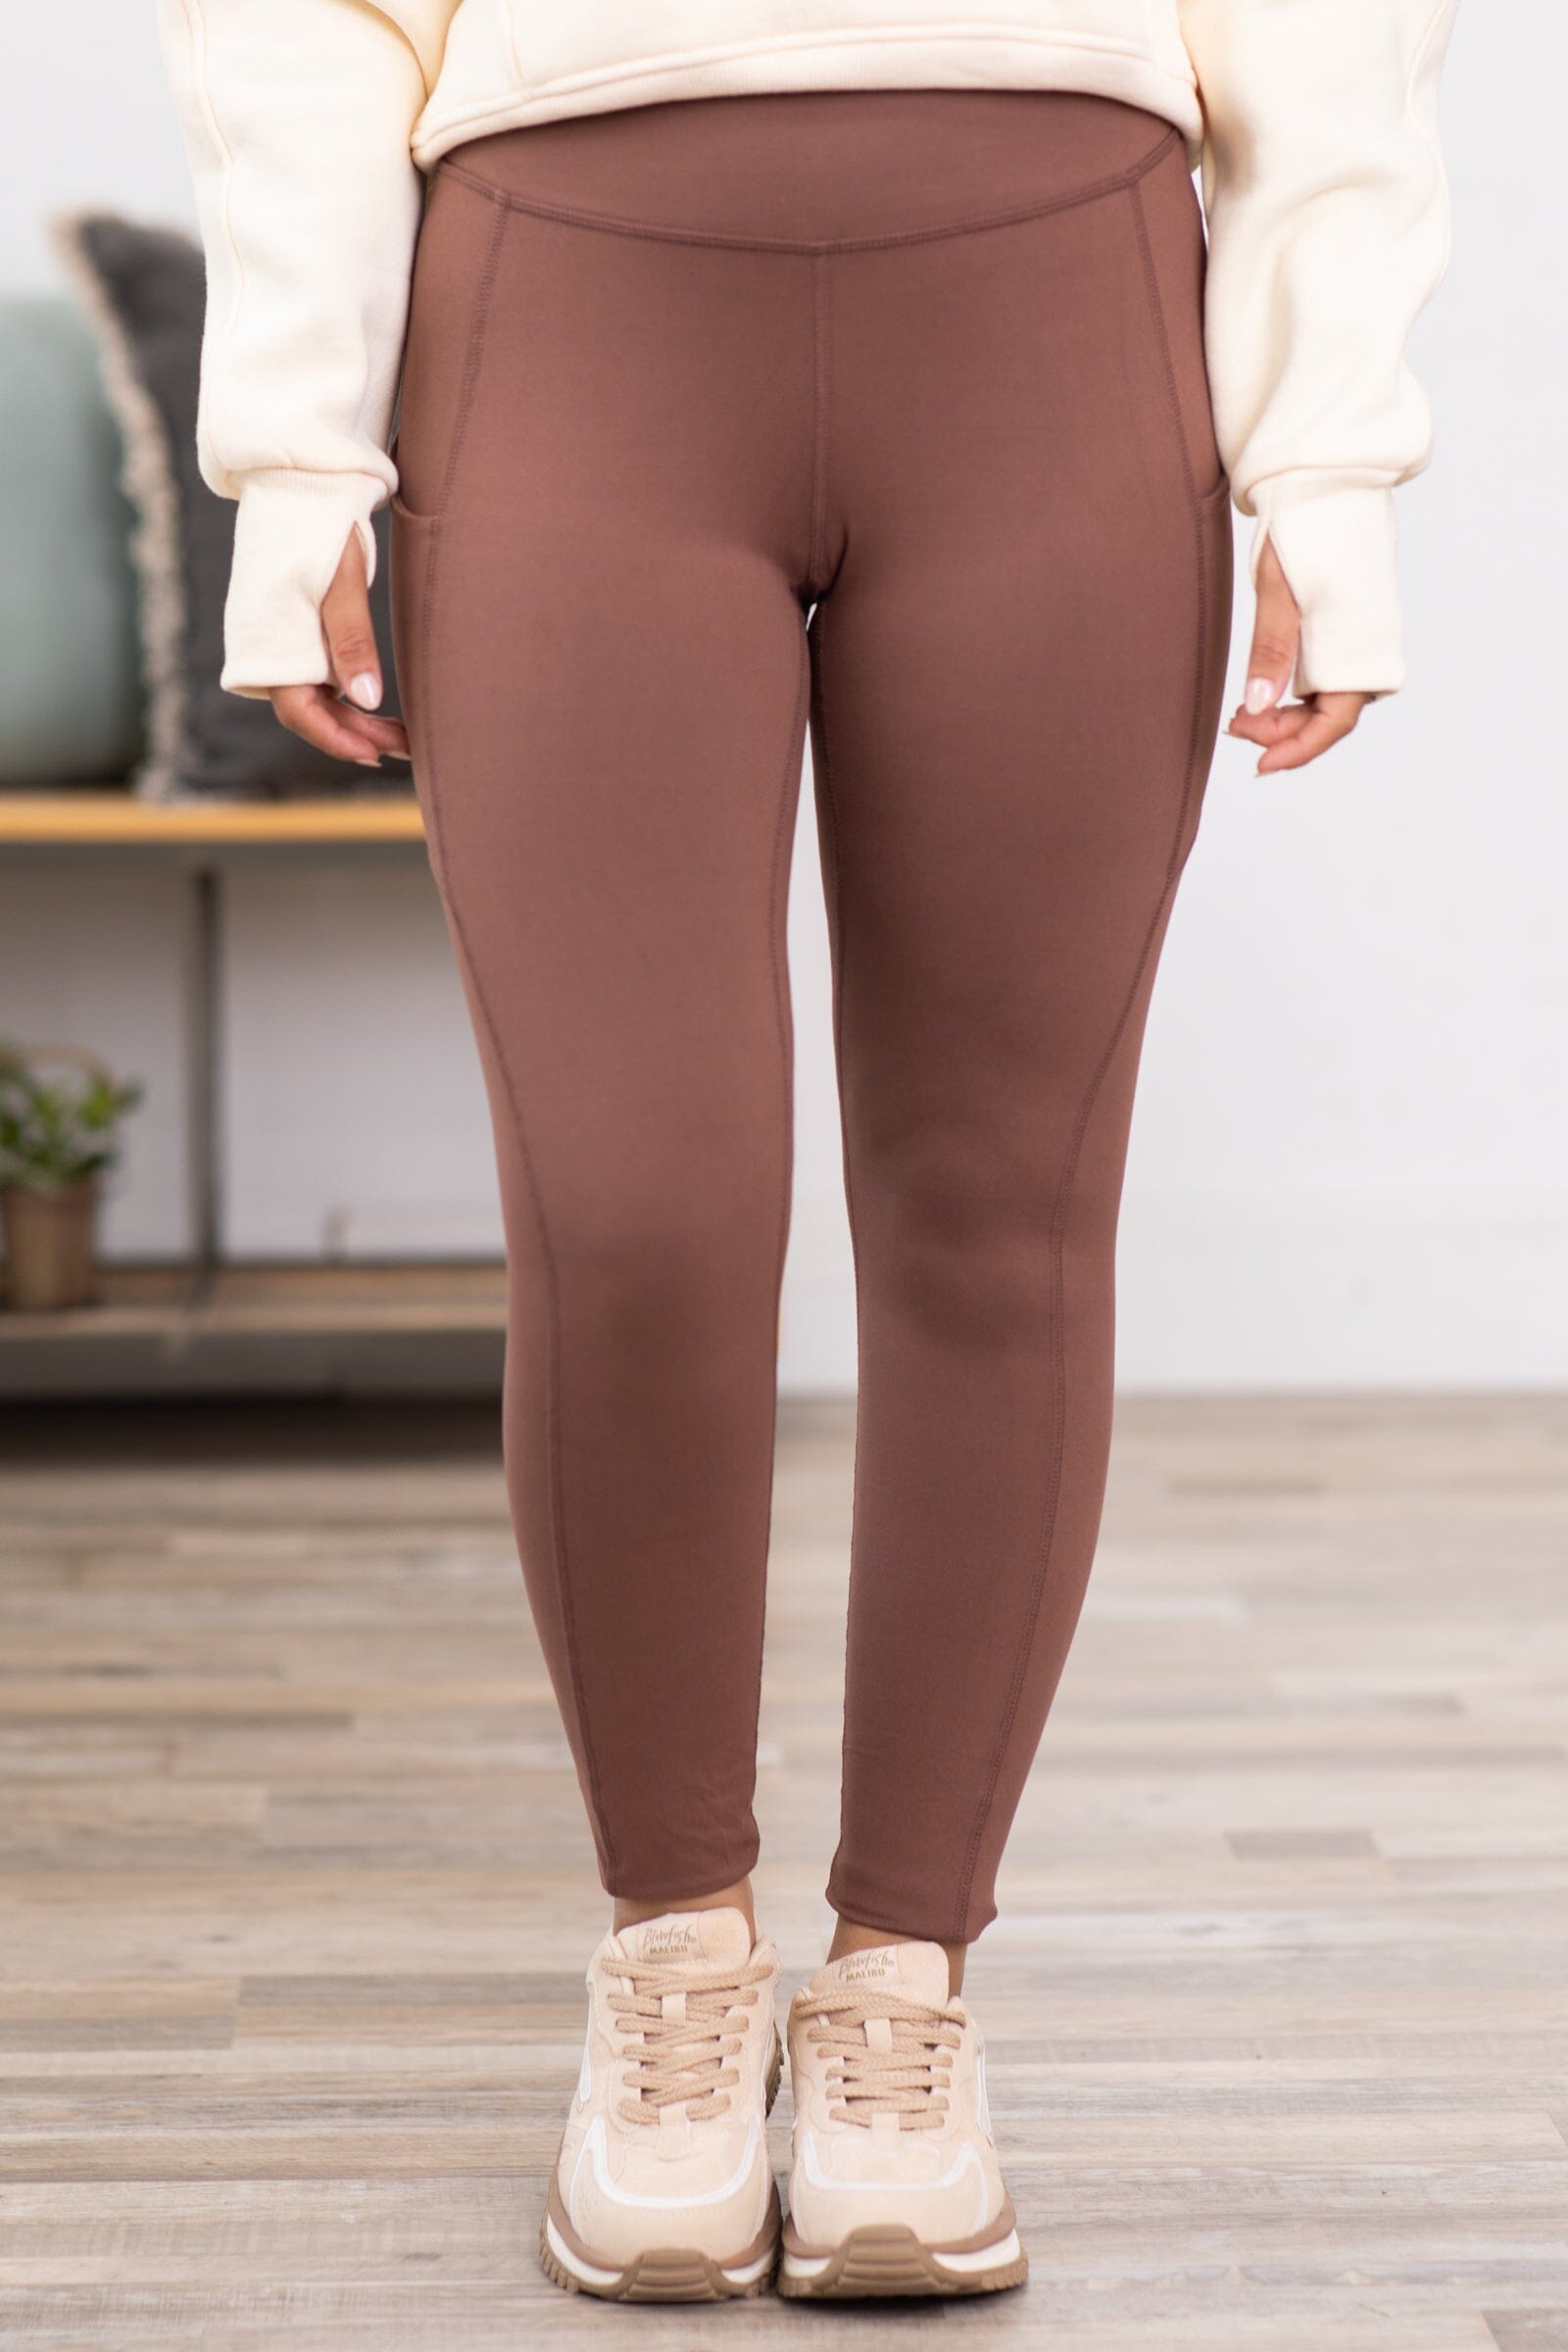 Brown Buttery Soft Leggings With Side Pocket - Filly Flair